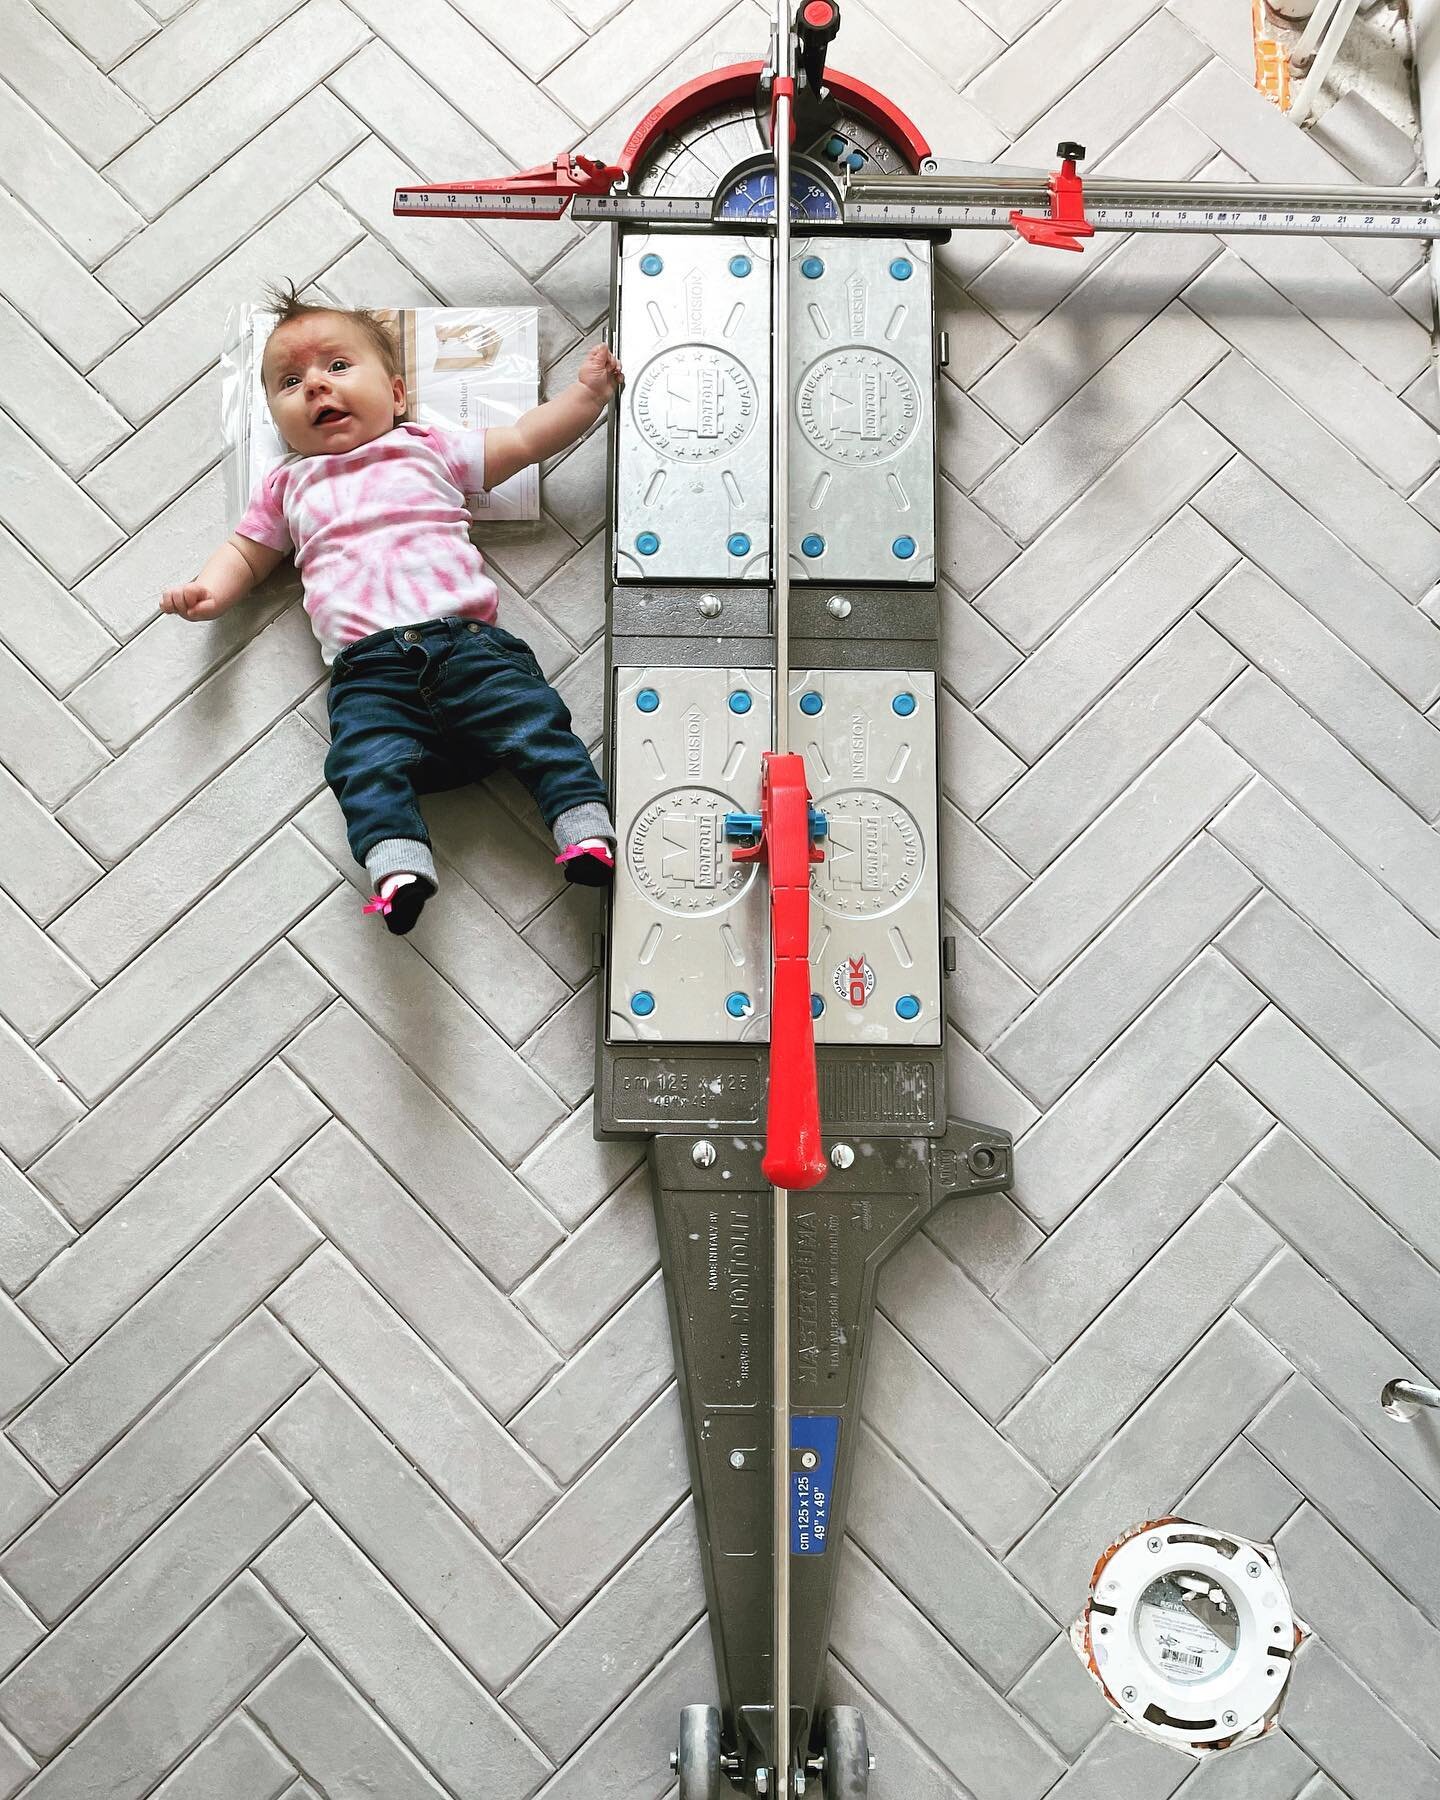 The newest member of the VersaTile fam, Rubi, is 2 months old!
So of course we took her milestone picture with this 5ft score cutter!

Check out the behind the scene pics of creating the floor for this photo 
.
.
.
#wemadethat #builtbydad #tilefamily